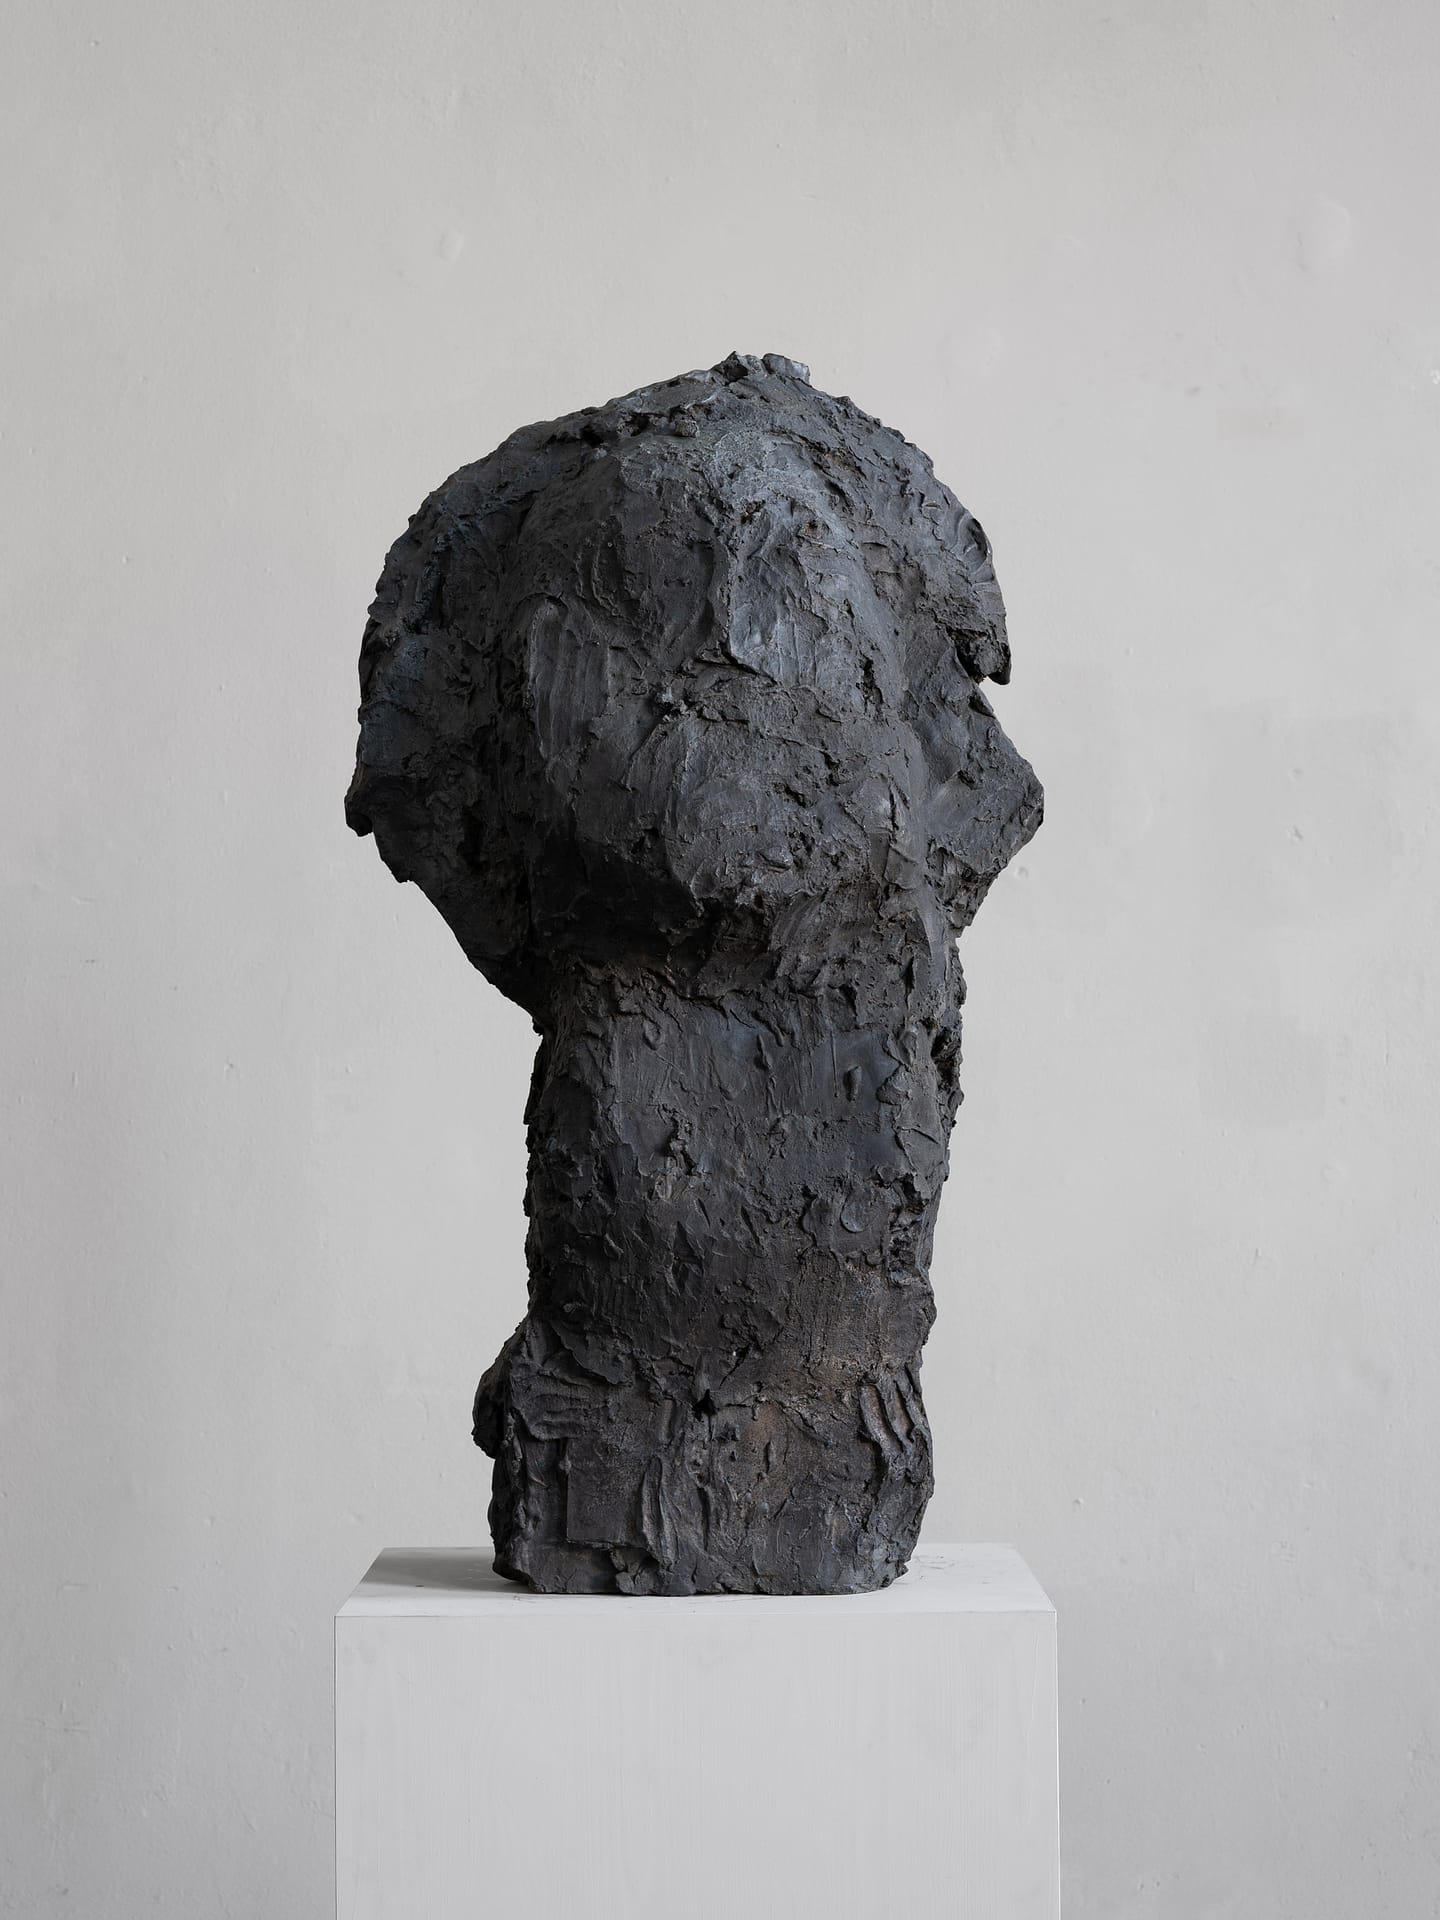 Skarstedt to open its fall season with a solo exhibition of the Swiss sculptor Hans Josephsohn.